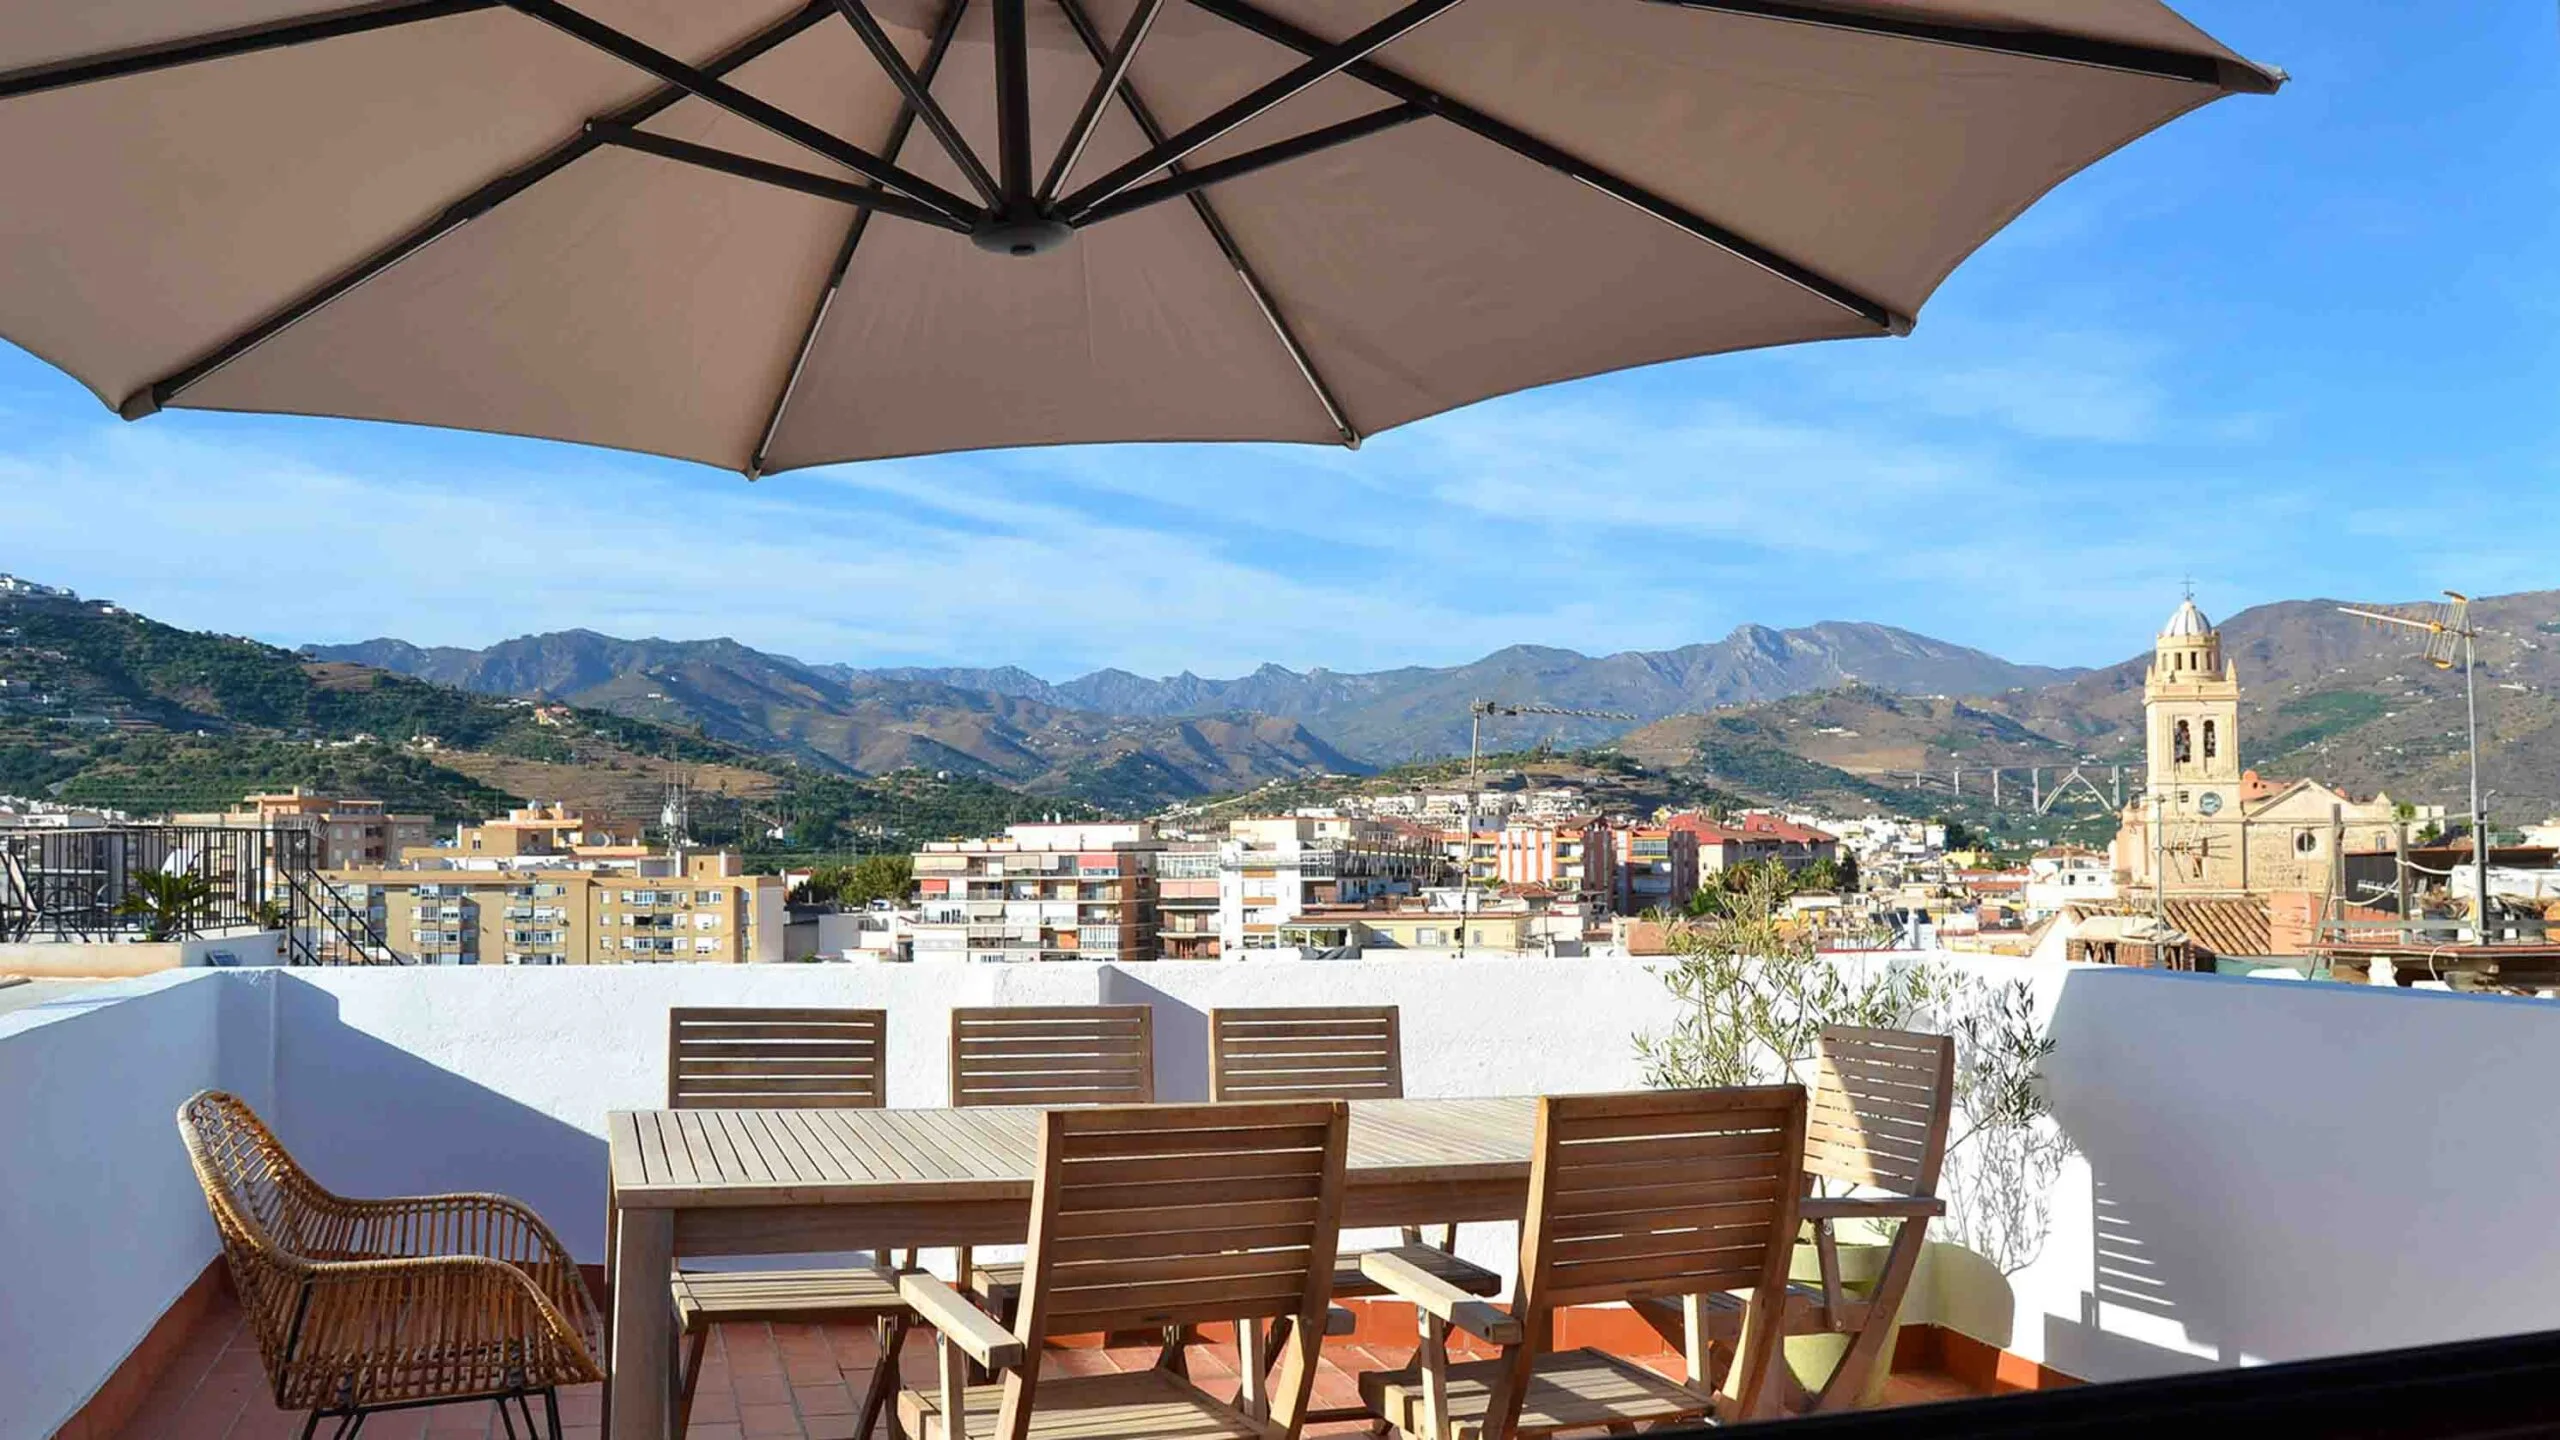 Rooftop patio at Vuelta a Costa Tropical cycling accommodation in Andalucia